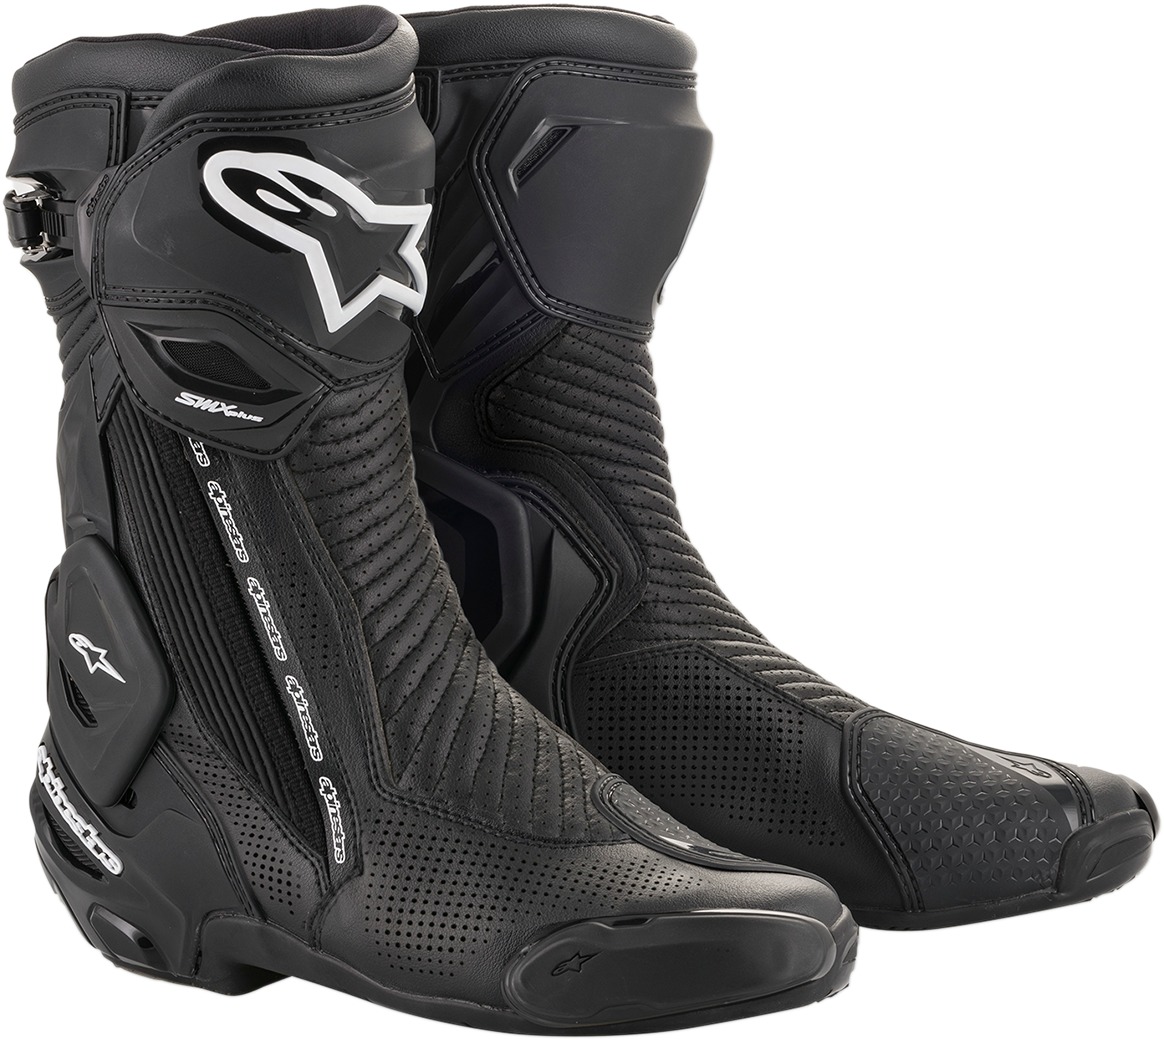 SMX Plus Street Riding Boots Black US 6.5 - Click Image to Close